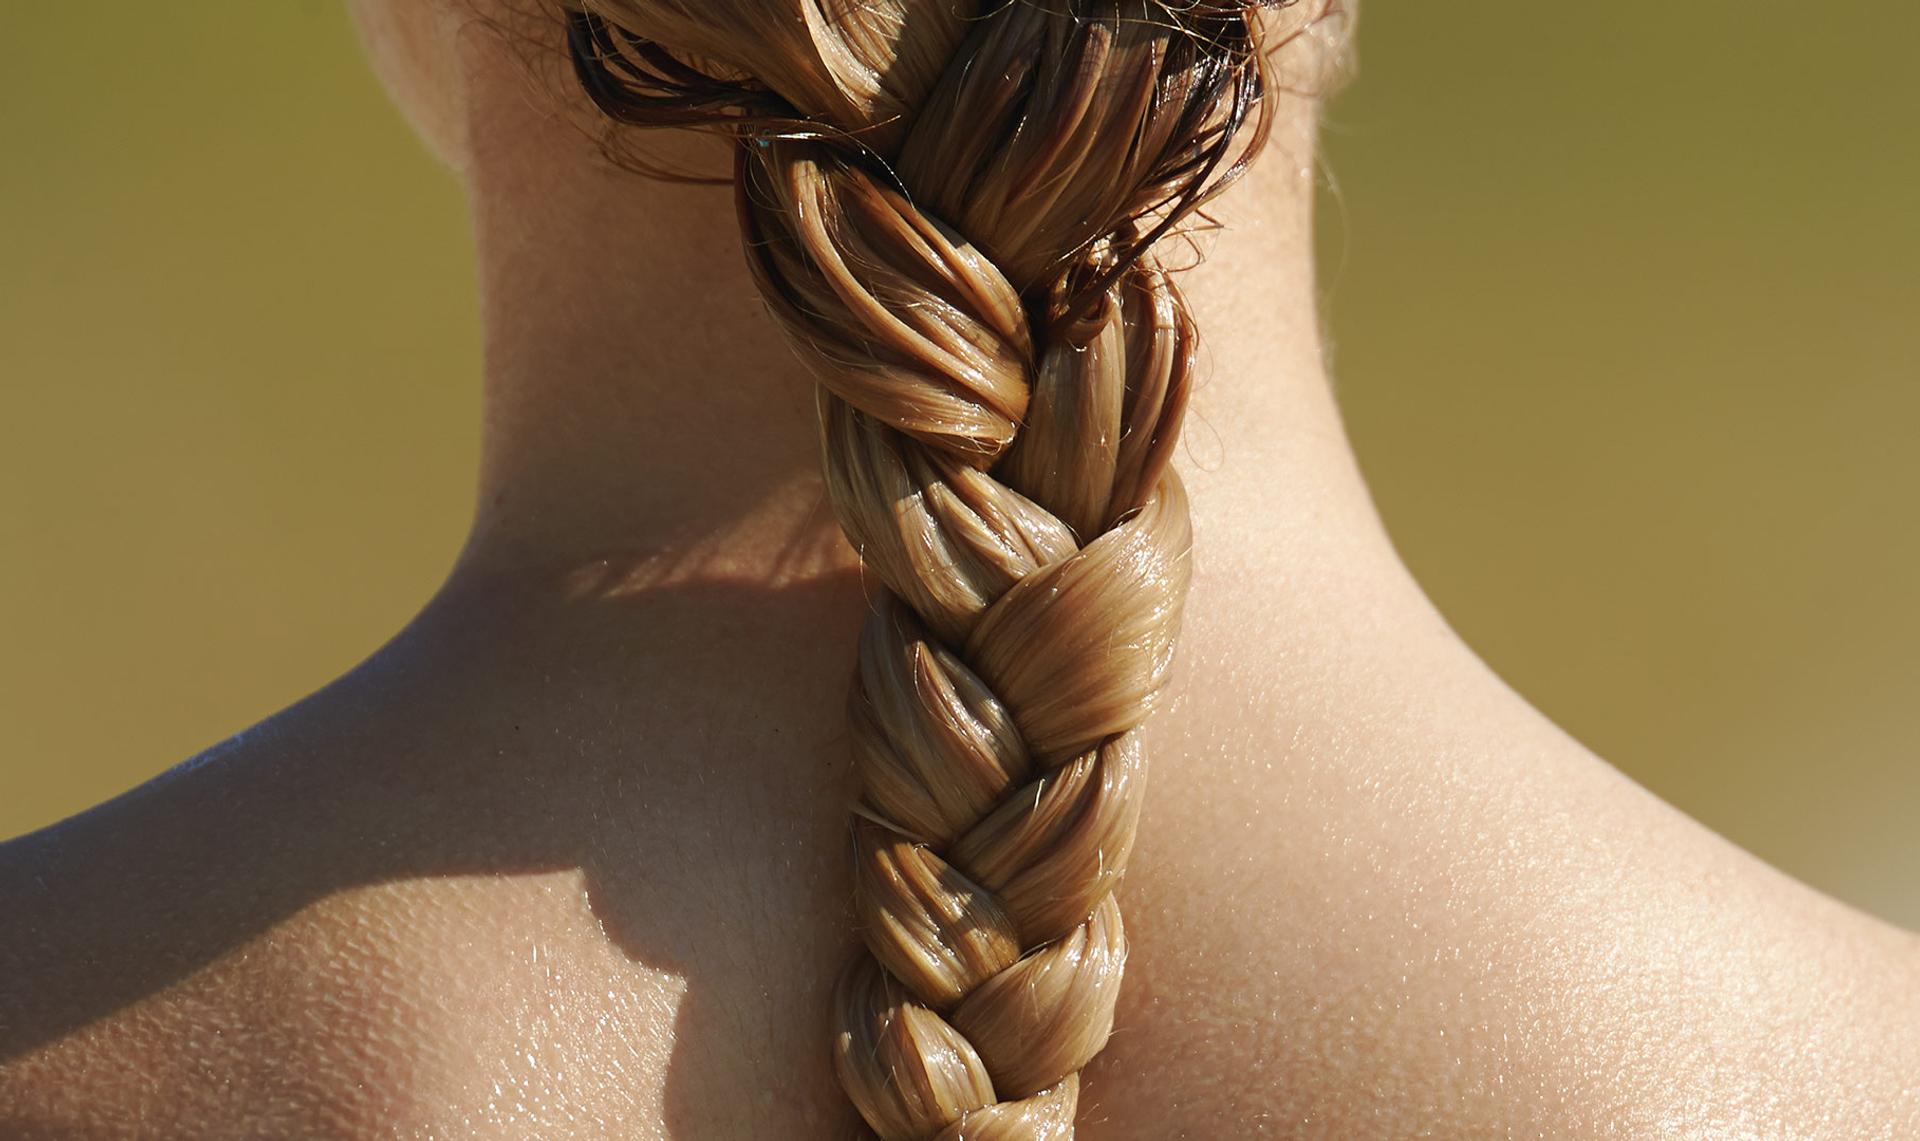 Image of the back of a women's neck and shoulders with wet braided hair down sitting down the length of the women's neck